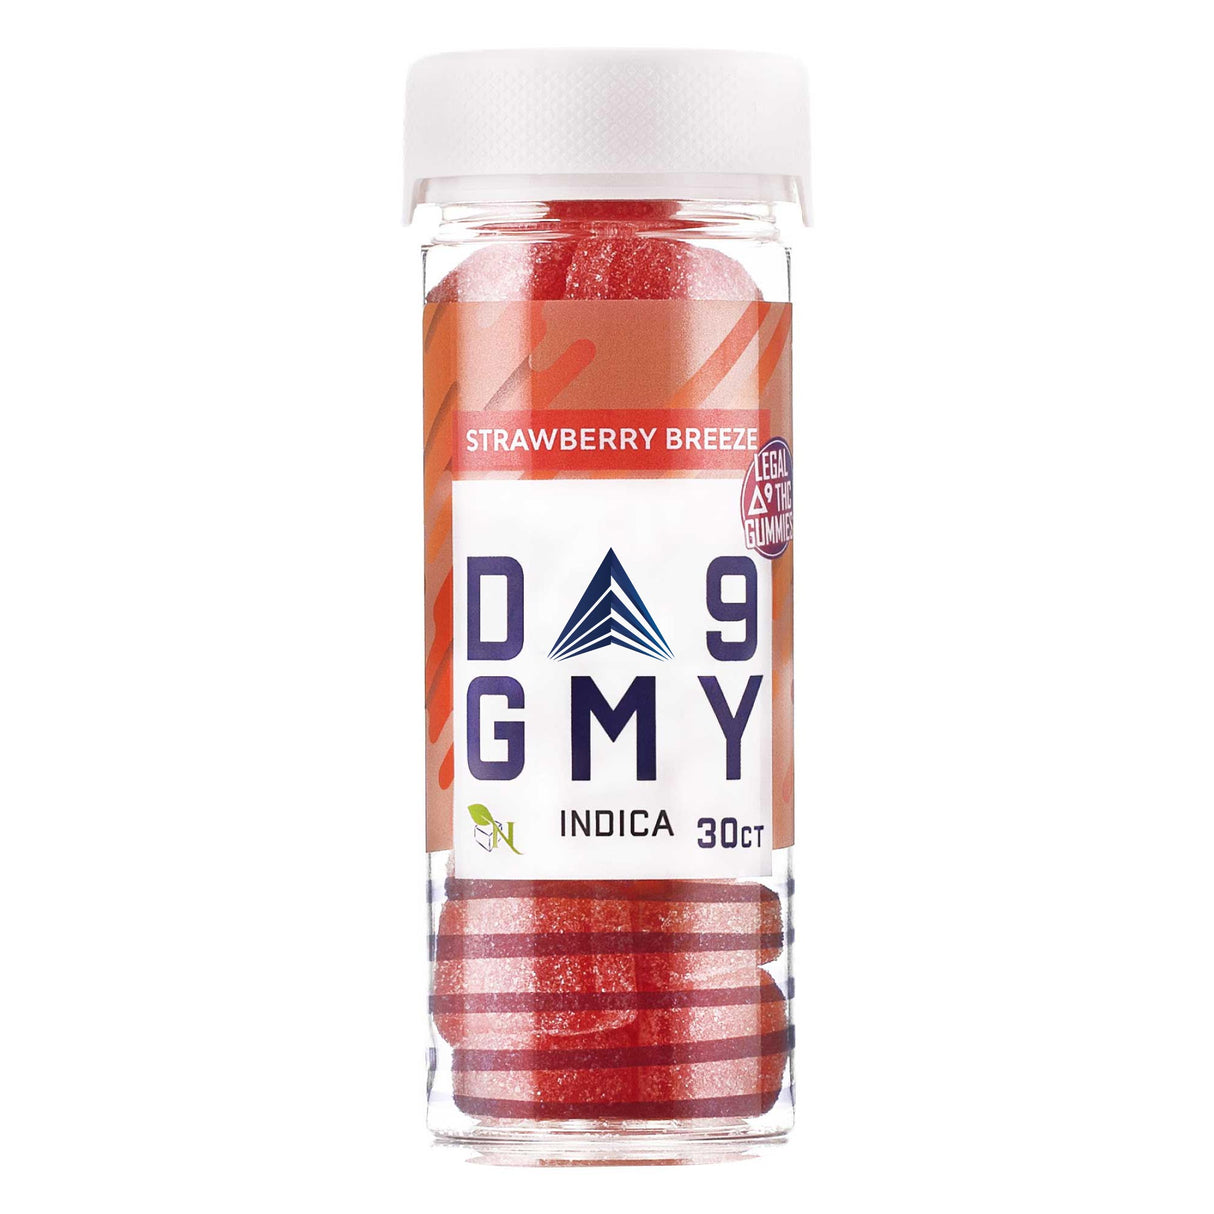 Our Delta-9 THC Indica Strawberry Gummies.